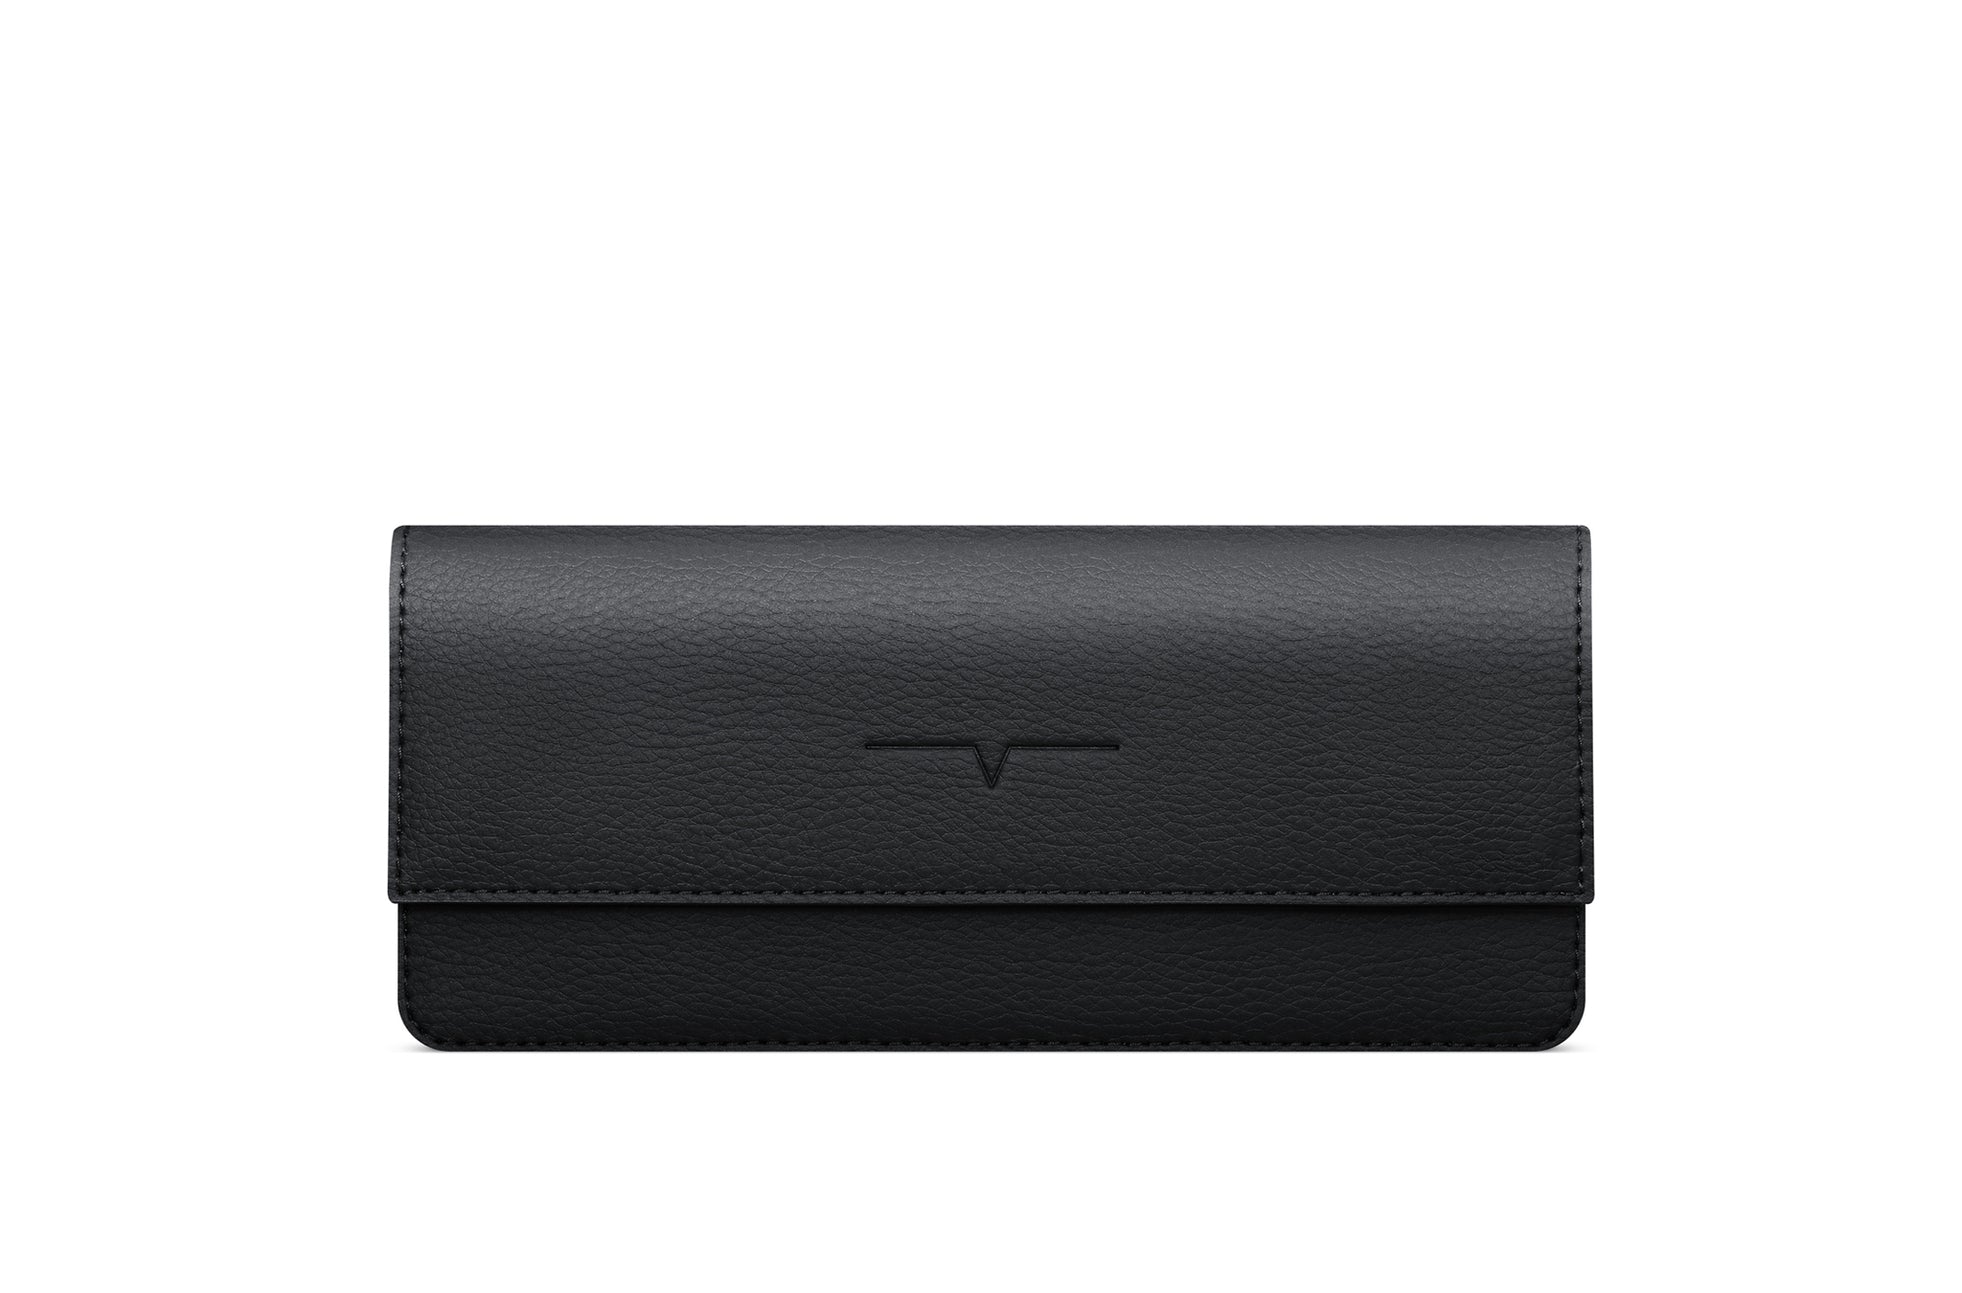 The Accordion Pouch in Technik-Leather in Black image 1